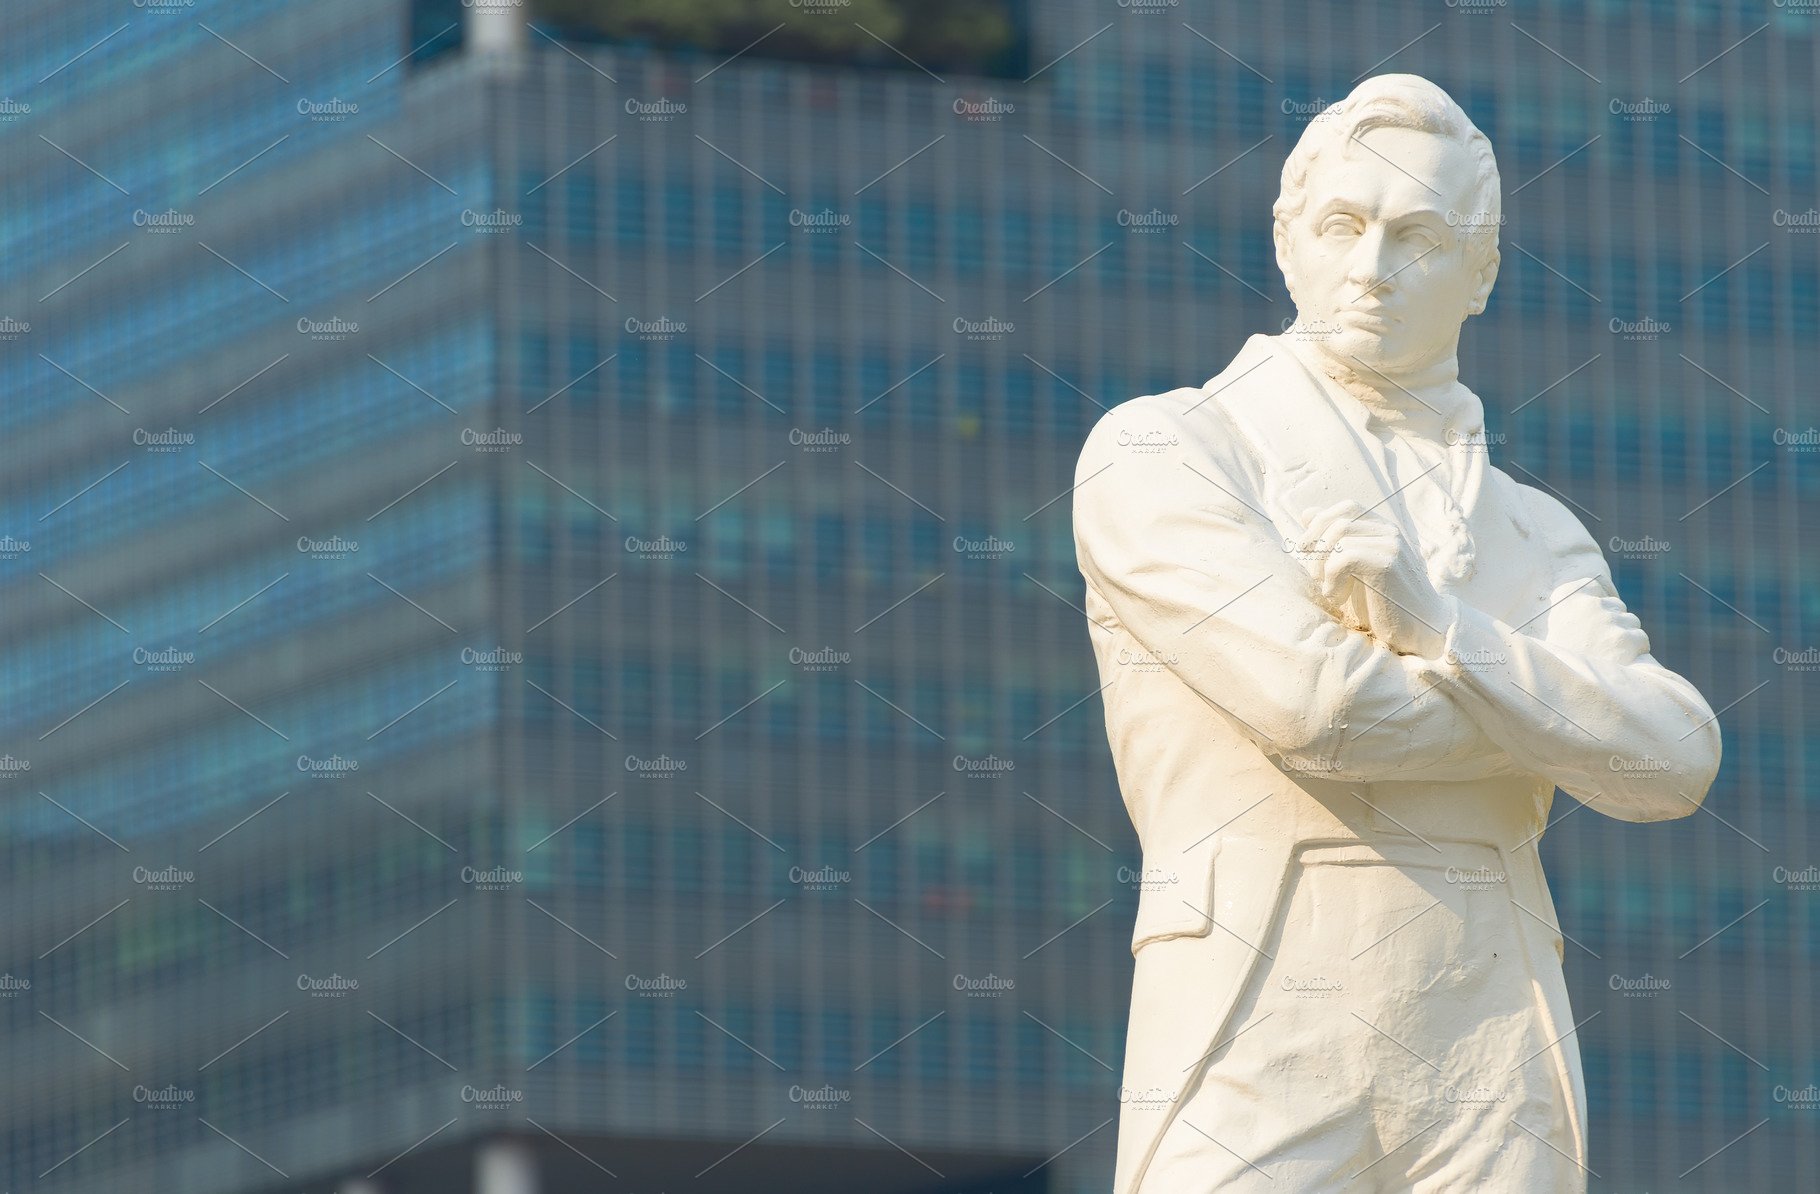 Find “Stamford Raffles” at year 1819 boarding site.